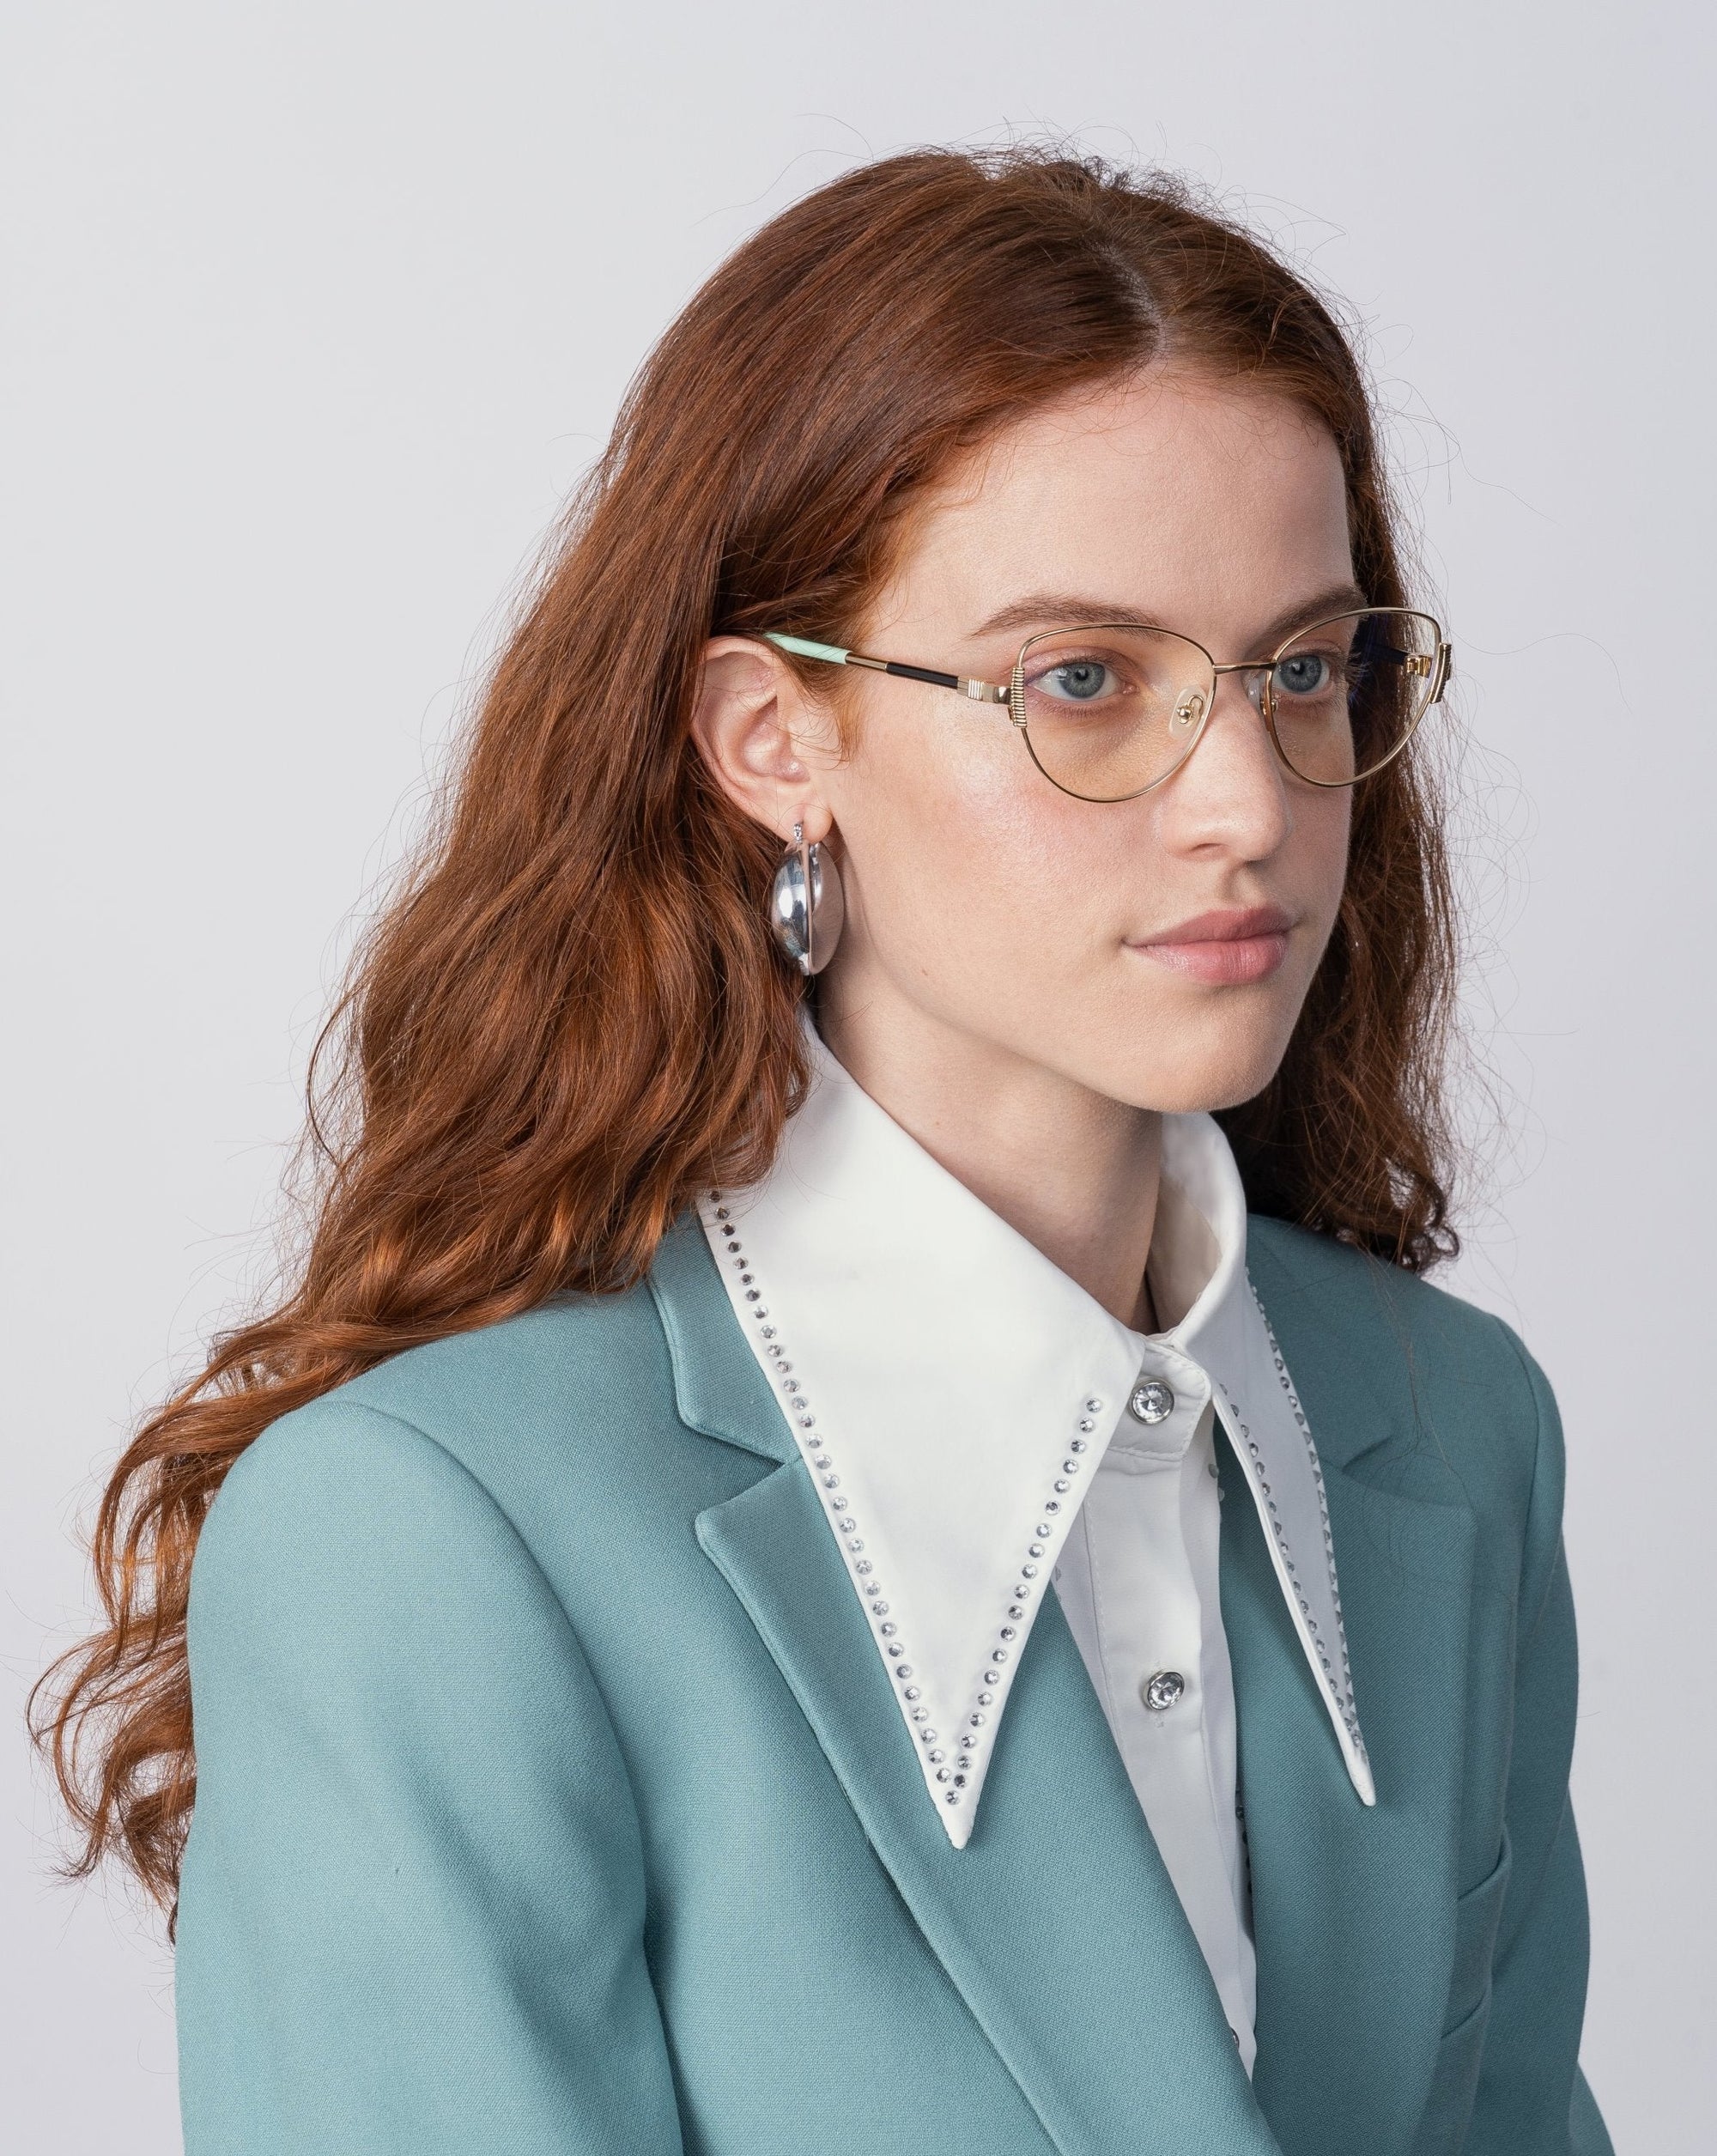 A person with long, wavy auburn hair wears a teal blazer over a white shirt with a large collar and metallic studs. They have glasses with prescription lenses and jade stone nose pads from the brand For Art&#39;s Sake®, specifically the Dante model, along with silver hoop earrings. They&#39;re looking to the side against a plain white background.